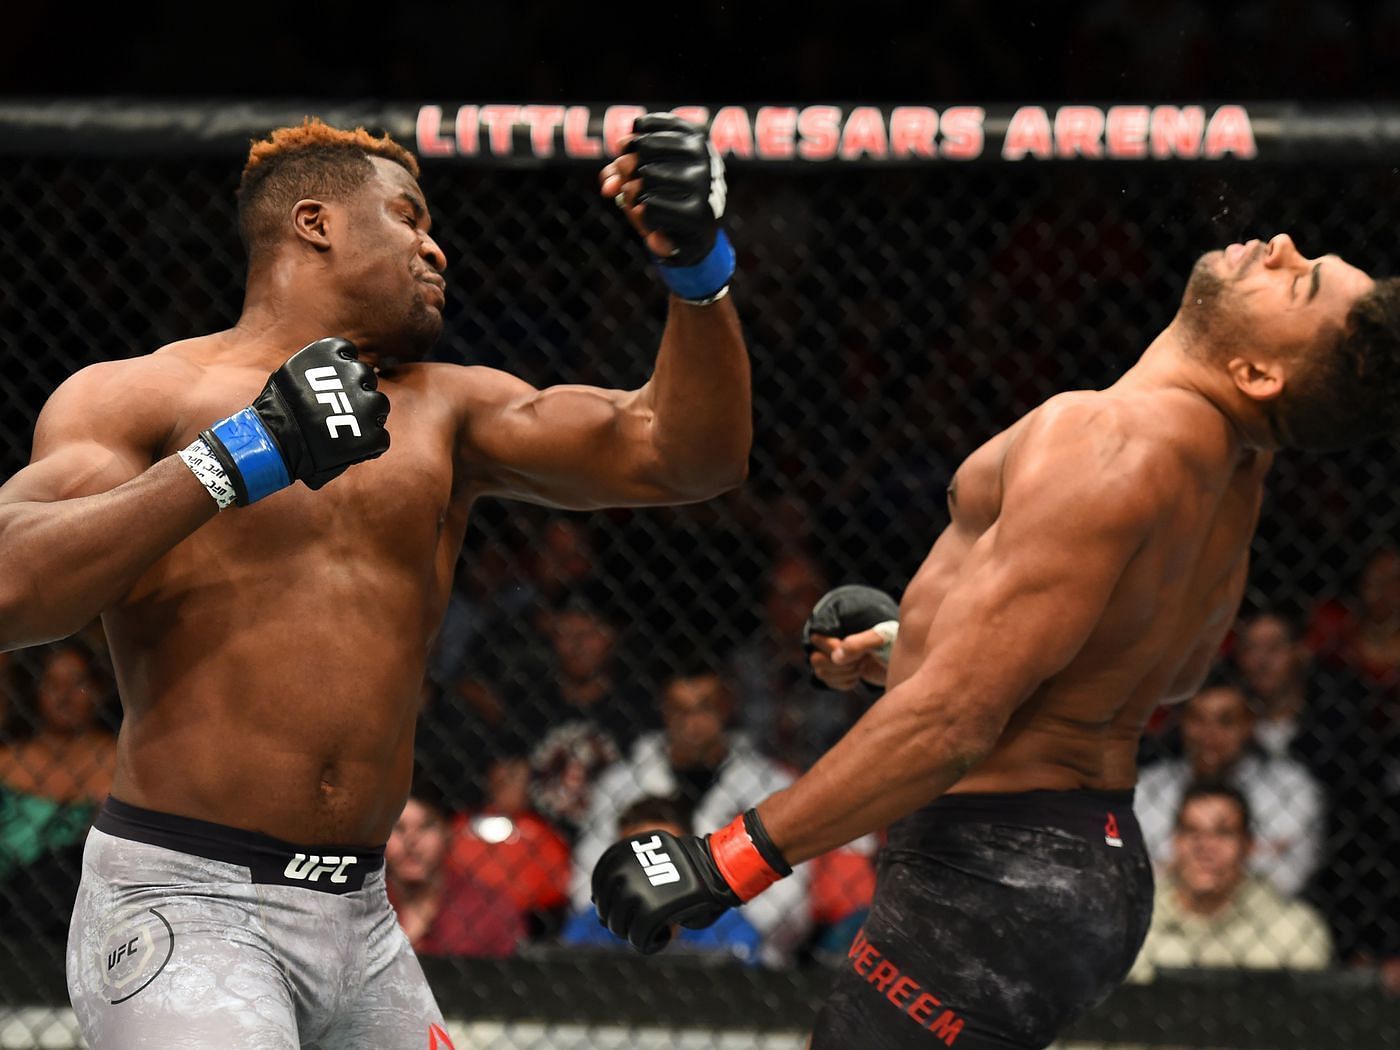 Francis Ngannou used a Mortal Kombat-style uppercut to take out Alistair Overeem at UFC 218